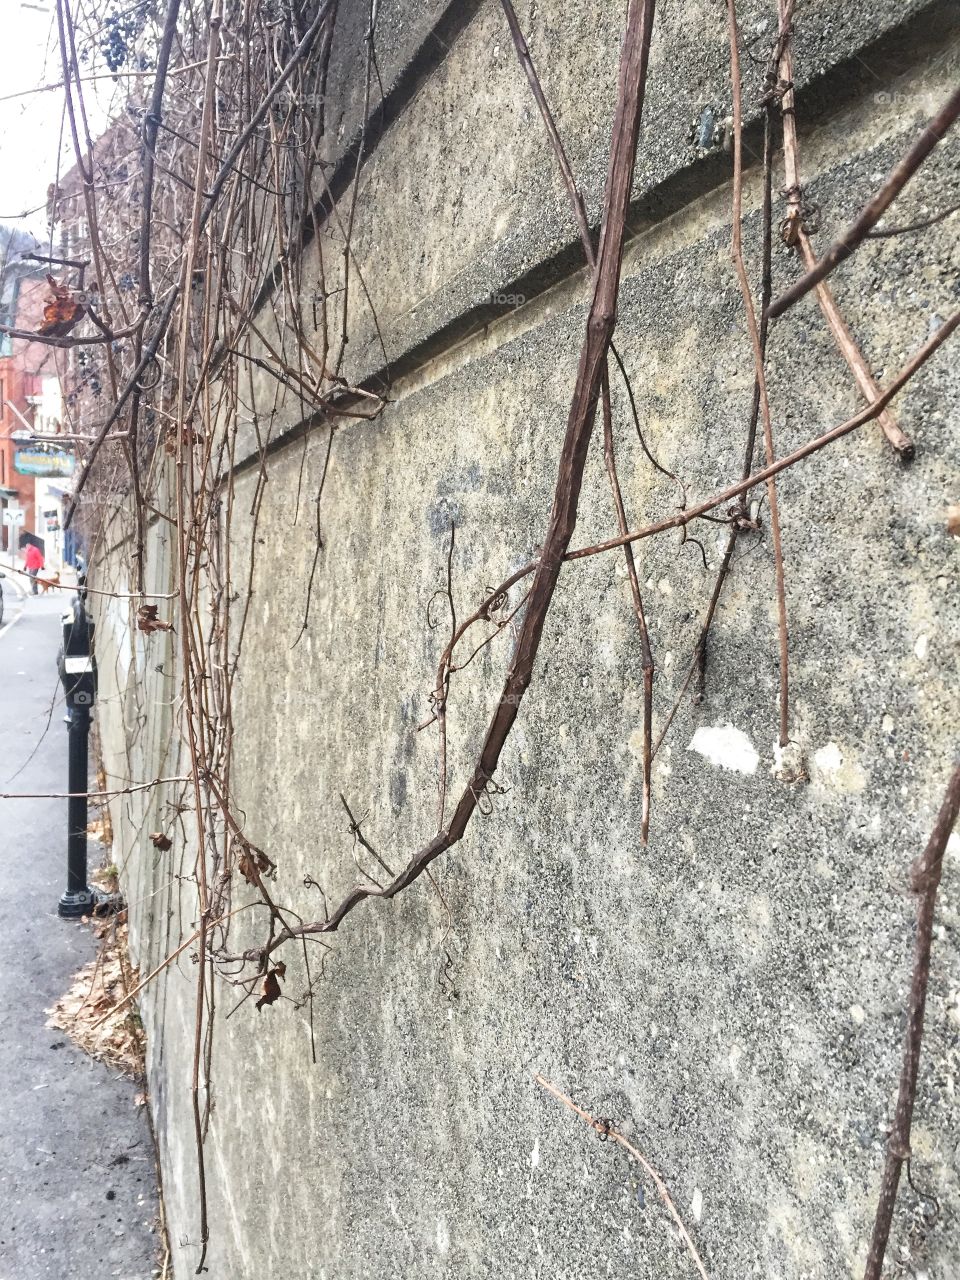 A close up shot of dead ivy on a cement wall in the winter. In the background, there is a parking meter.